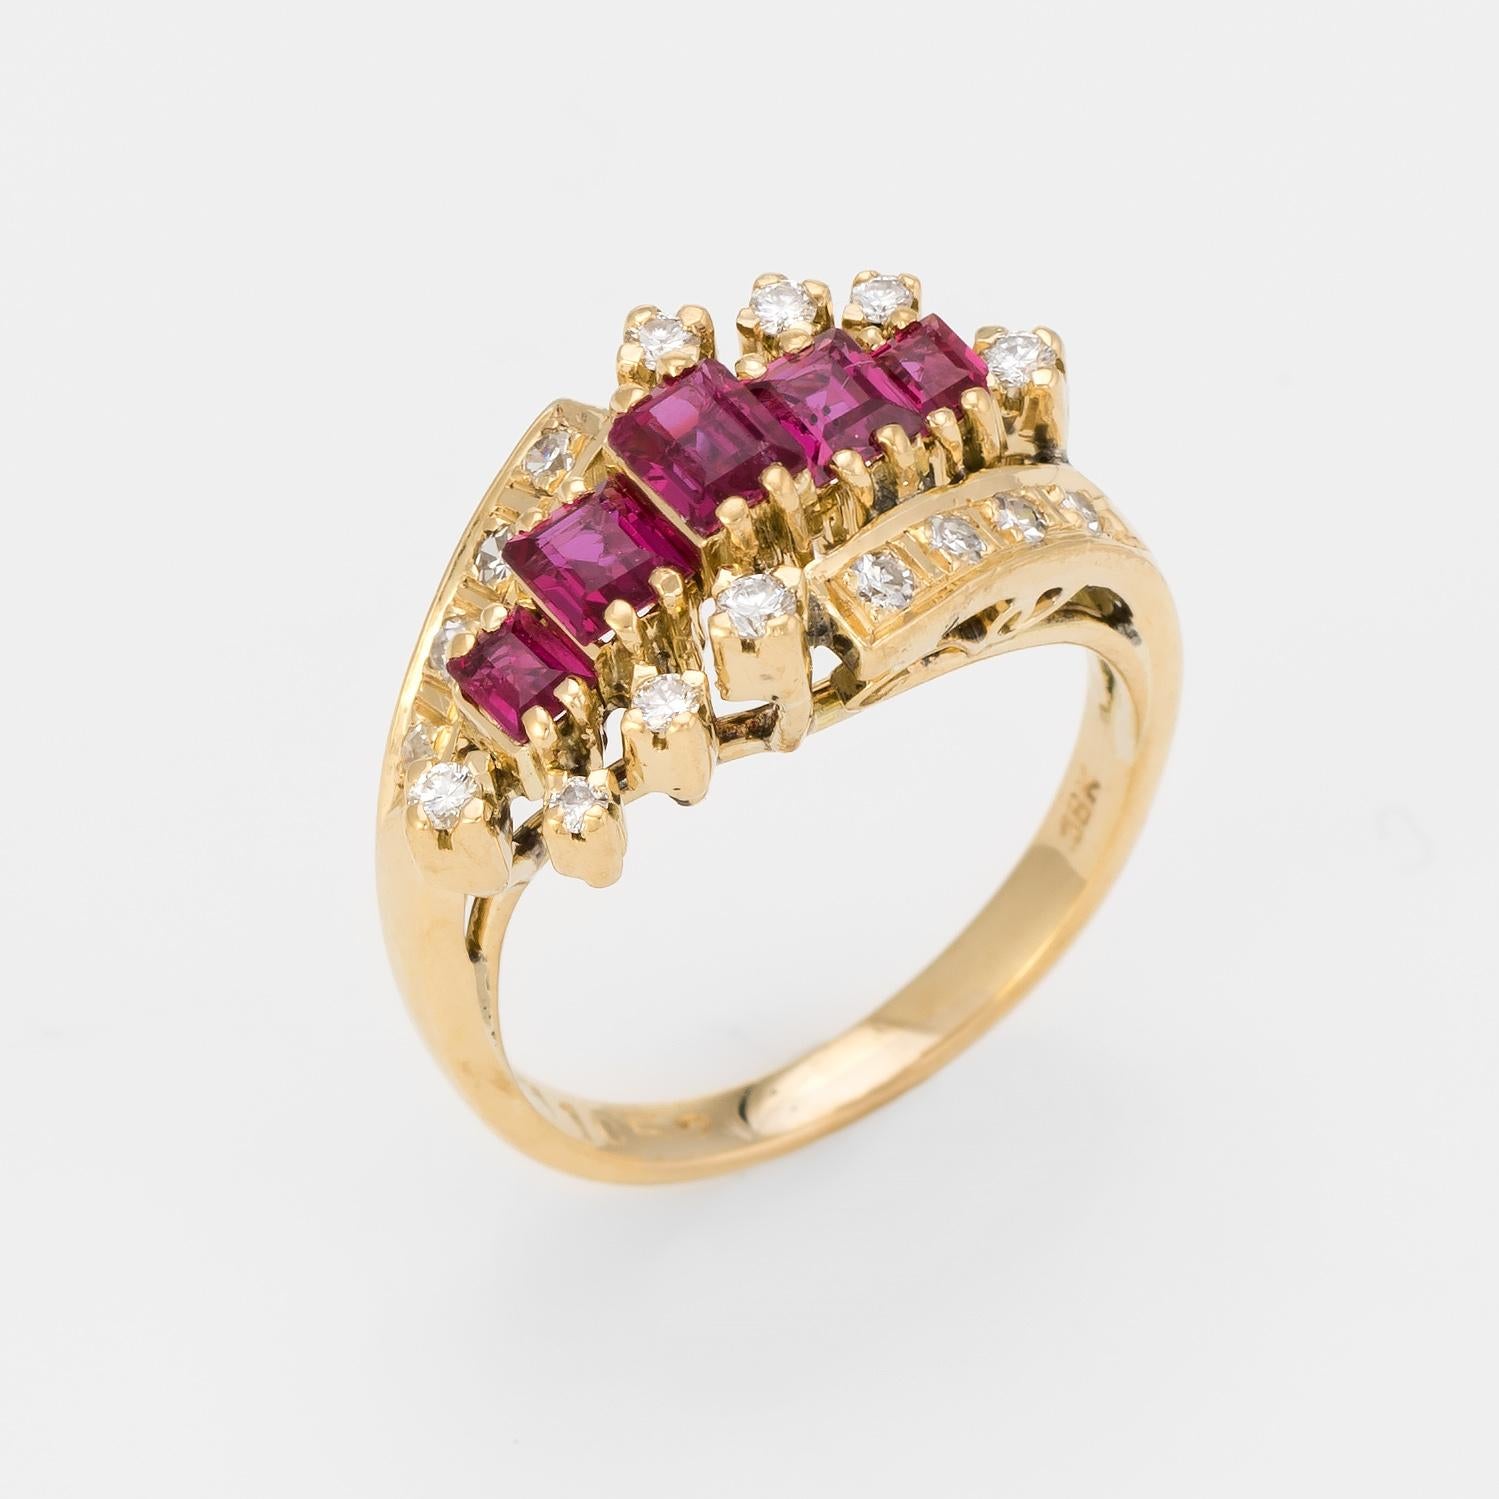 Finely detailed vintage ruby & diamond ring (circa 1960s to 1970s), crafted in 18 karat yellow gold. 

Emerald cut rubies graduated in size from 2.5mm to 4mm. The total ruby weight is estimated at 1 carat. 16 round brilliant and single cut diamonds